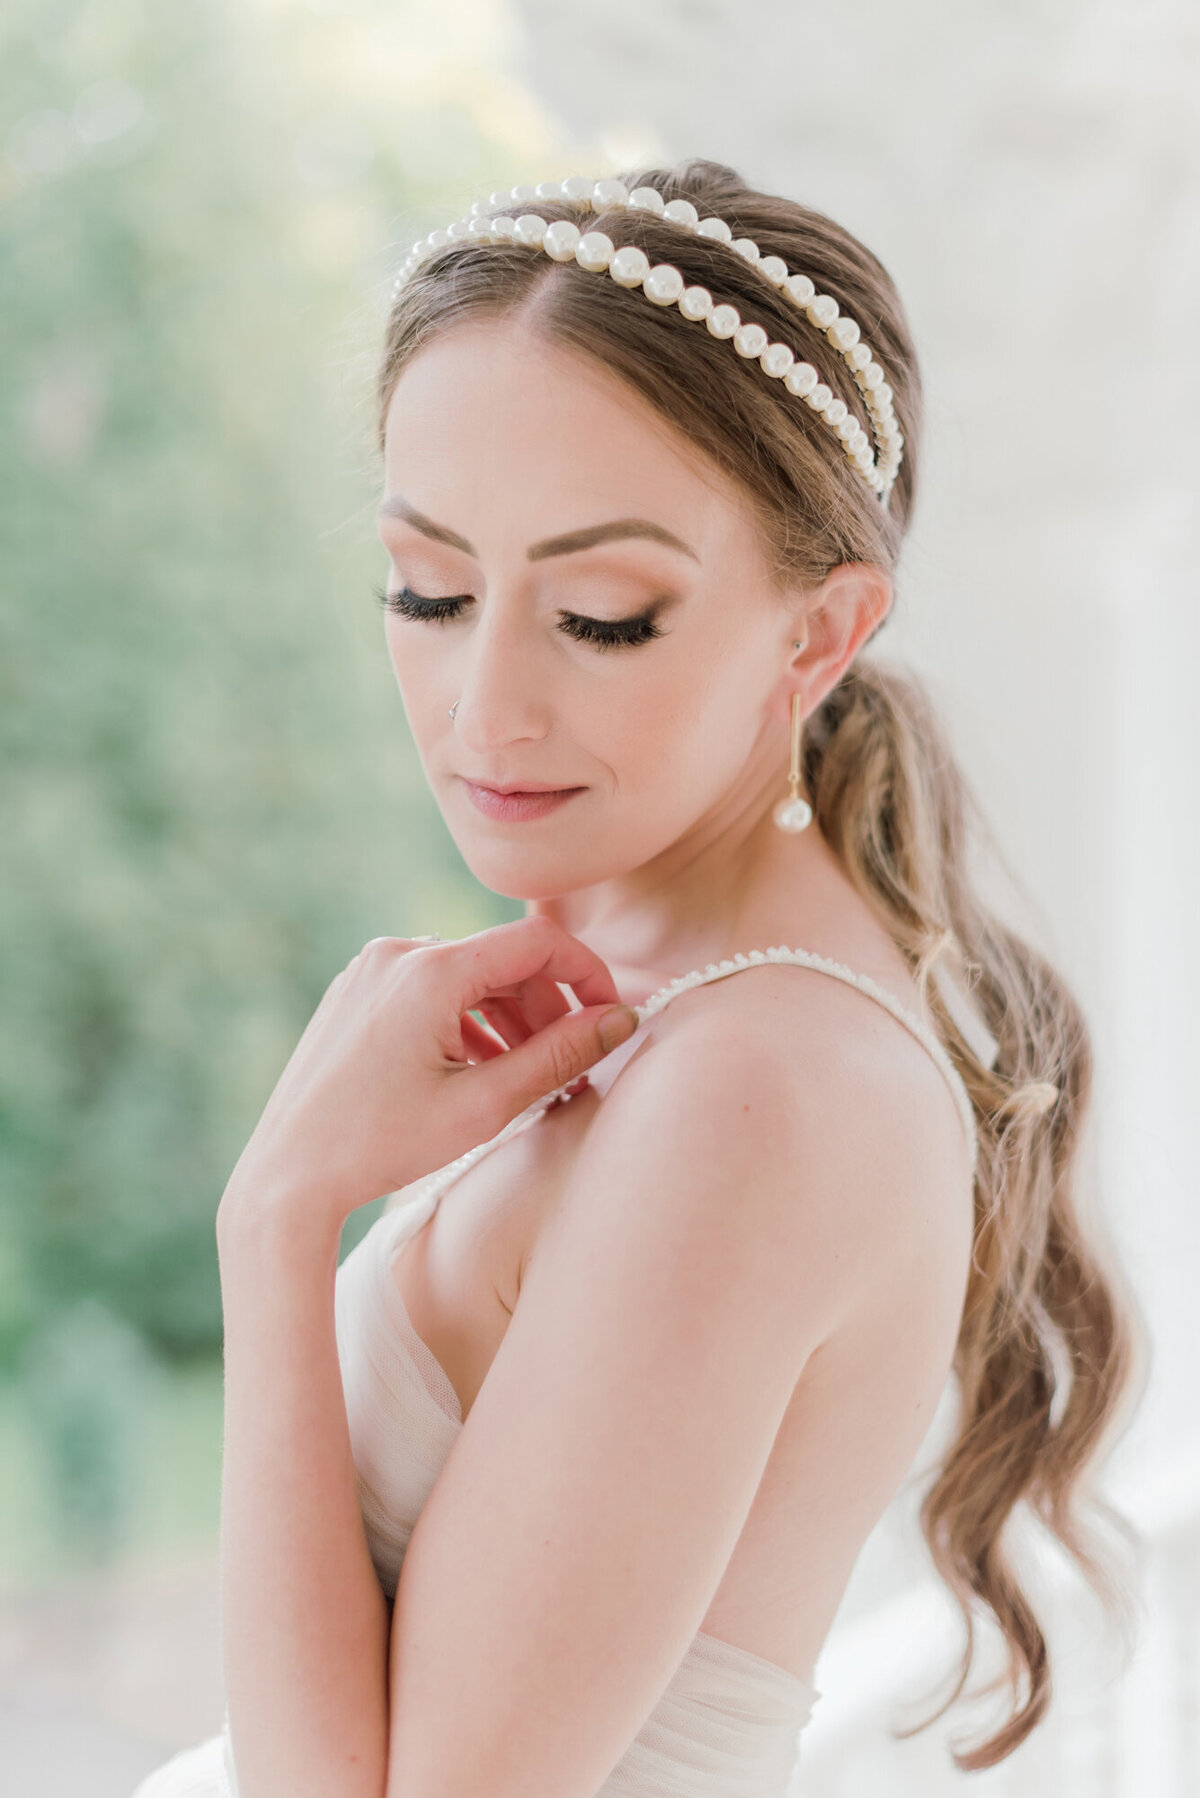 Stunning pearl bridal hairpiece, by Blair Nadeau Bridal Adornments, romantic and modern wedding jewelry based in Brampton. Featured on the Brontë Bride Vendor Guide.